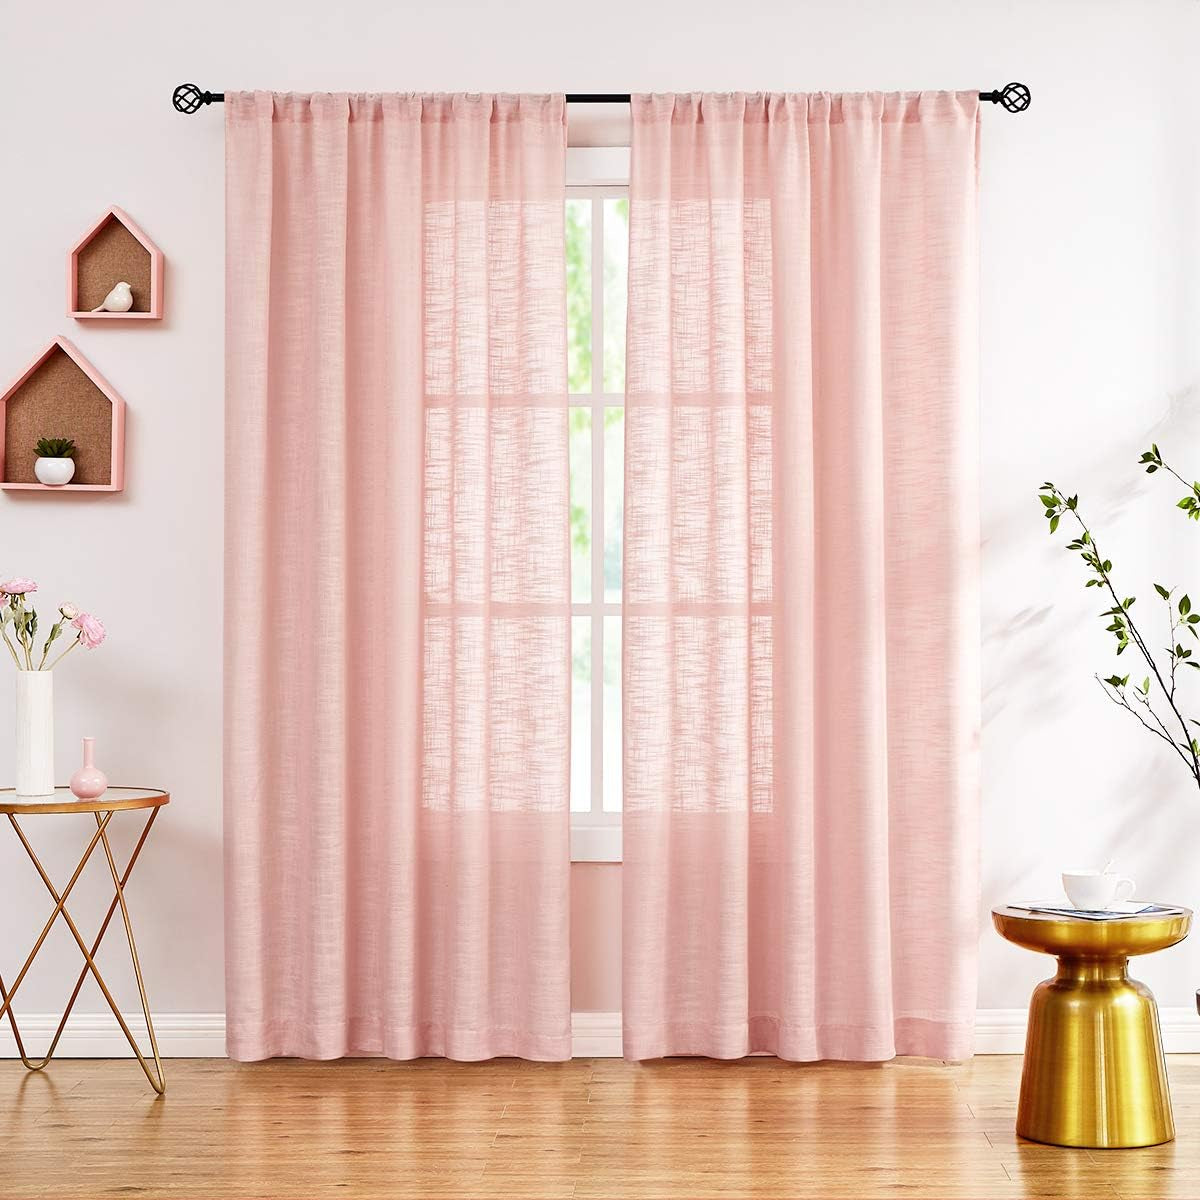 FMFUNCTEX Grey Semi-Sheer Curtains for Living Room Rich Linen Textured Rod Pocket Window Curtain Draperies for Guest Room Not See through 52”W X63”L Set of 2  Fmfunctex Coral/ Blush Pink 52" X 96" 2Pcs 